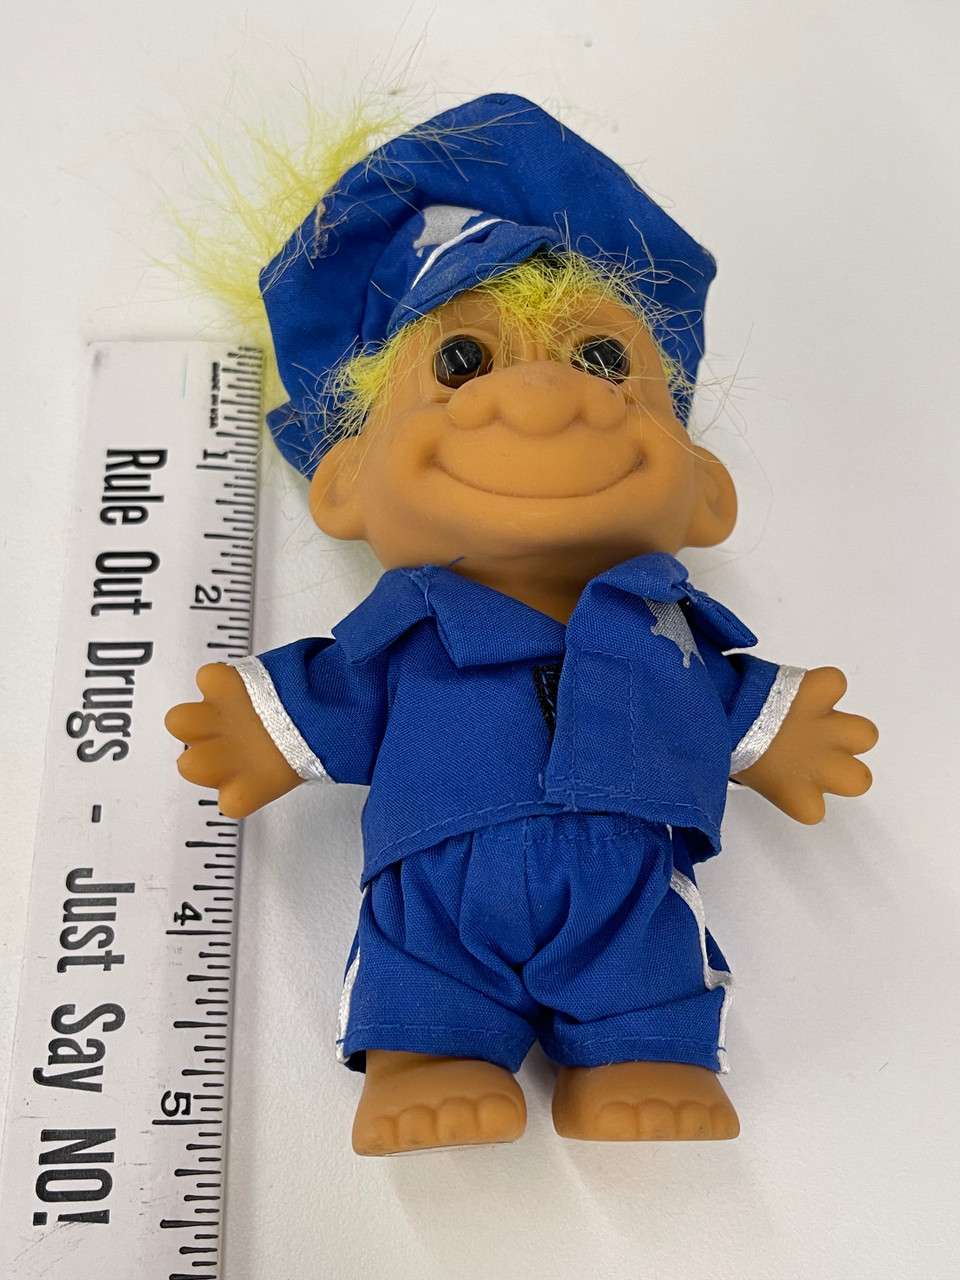 Vintage Russ 5” Policeman Troll Doll Police Officer Yellow Hair